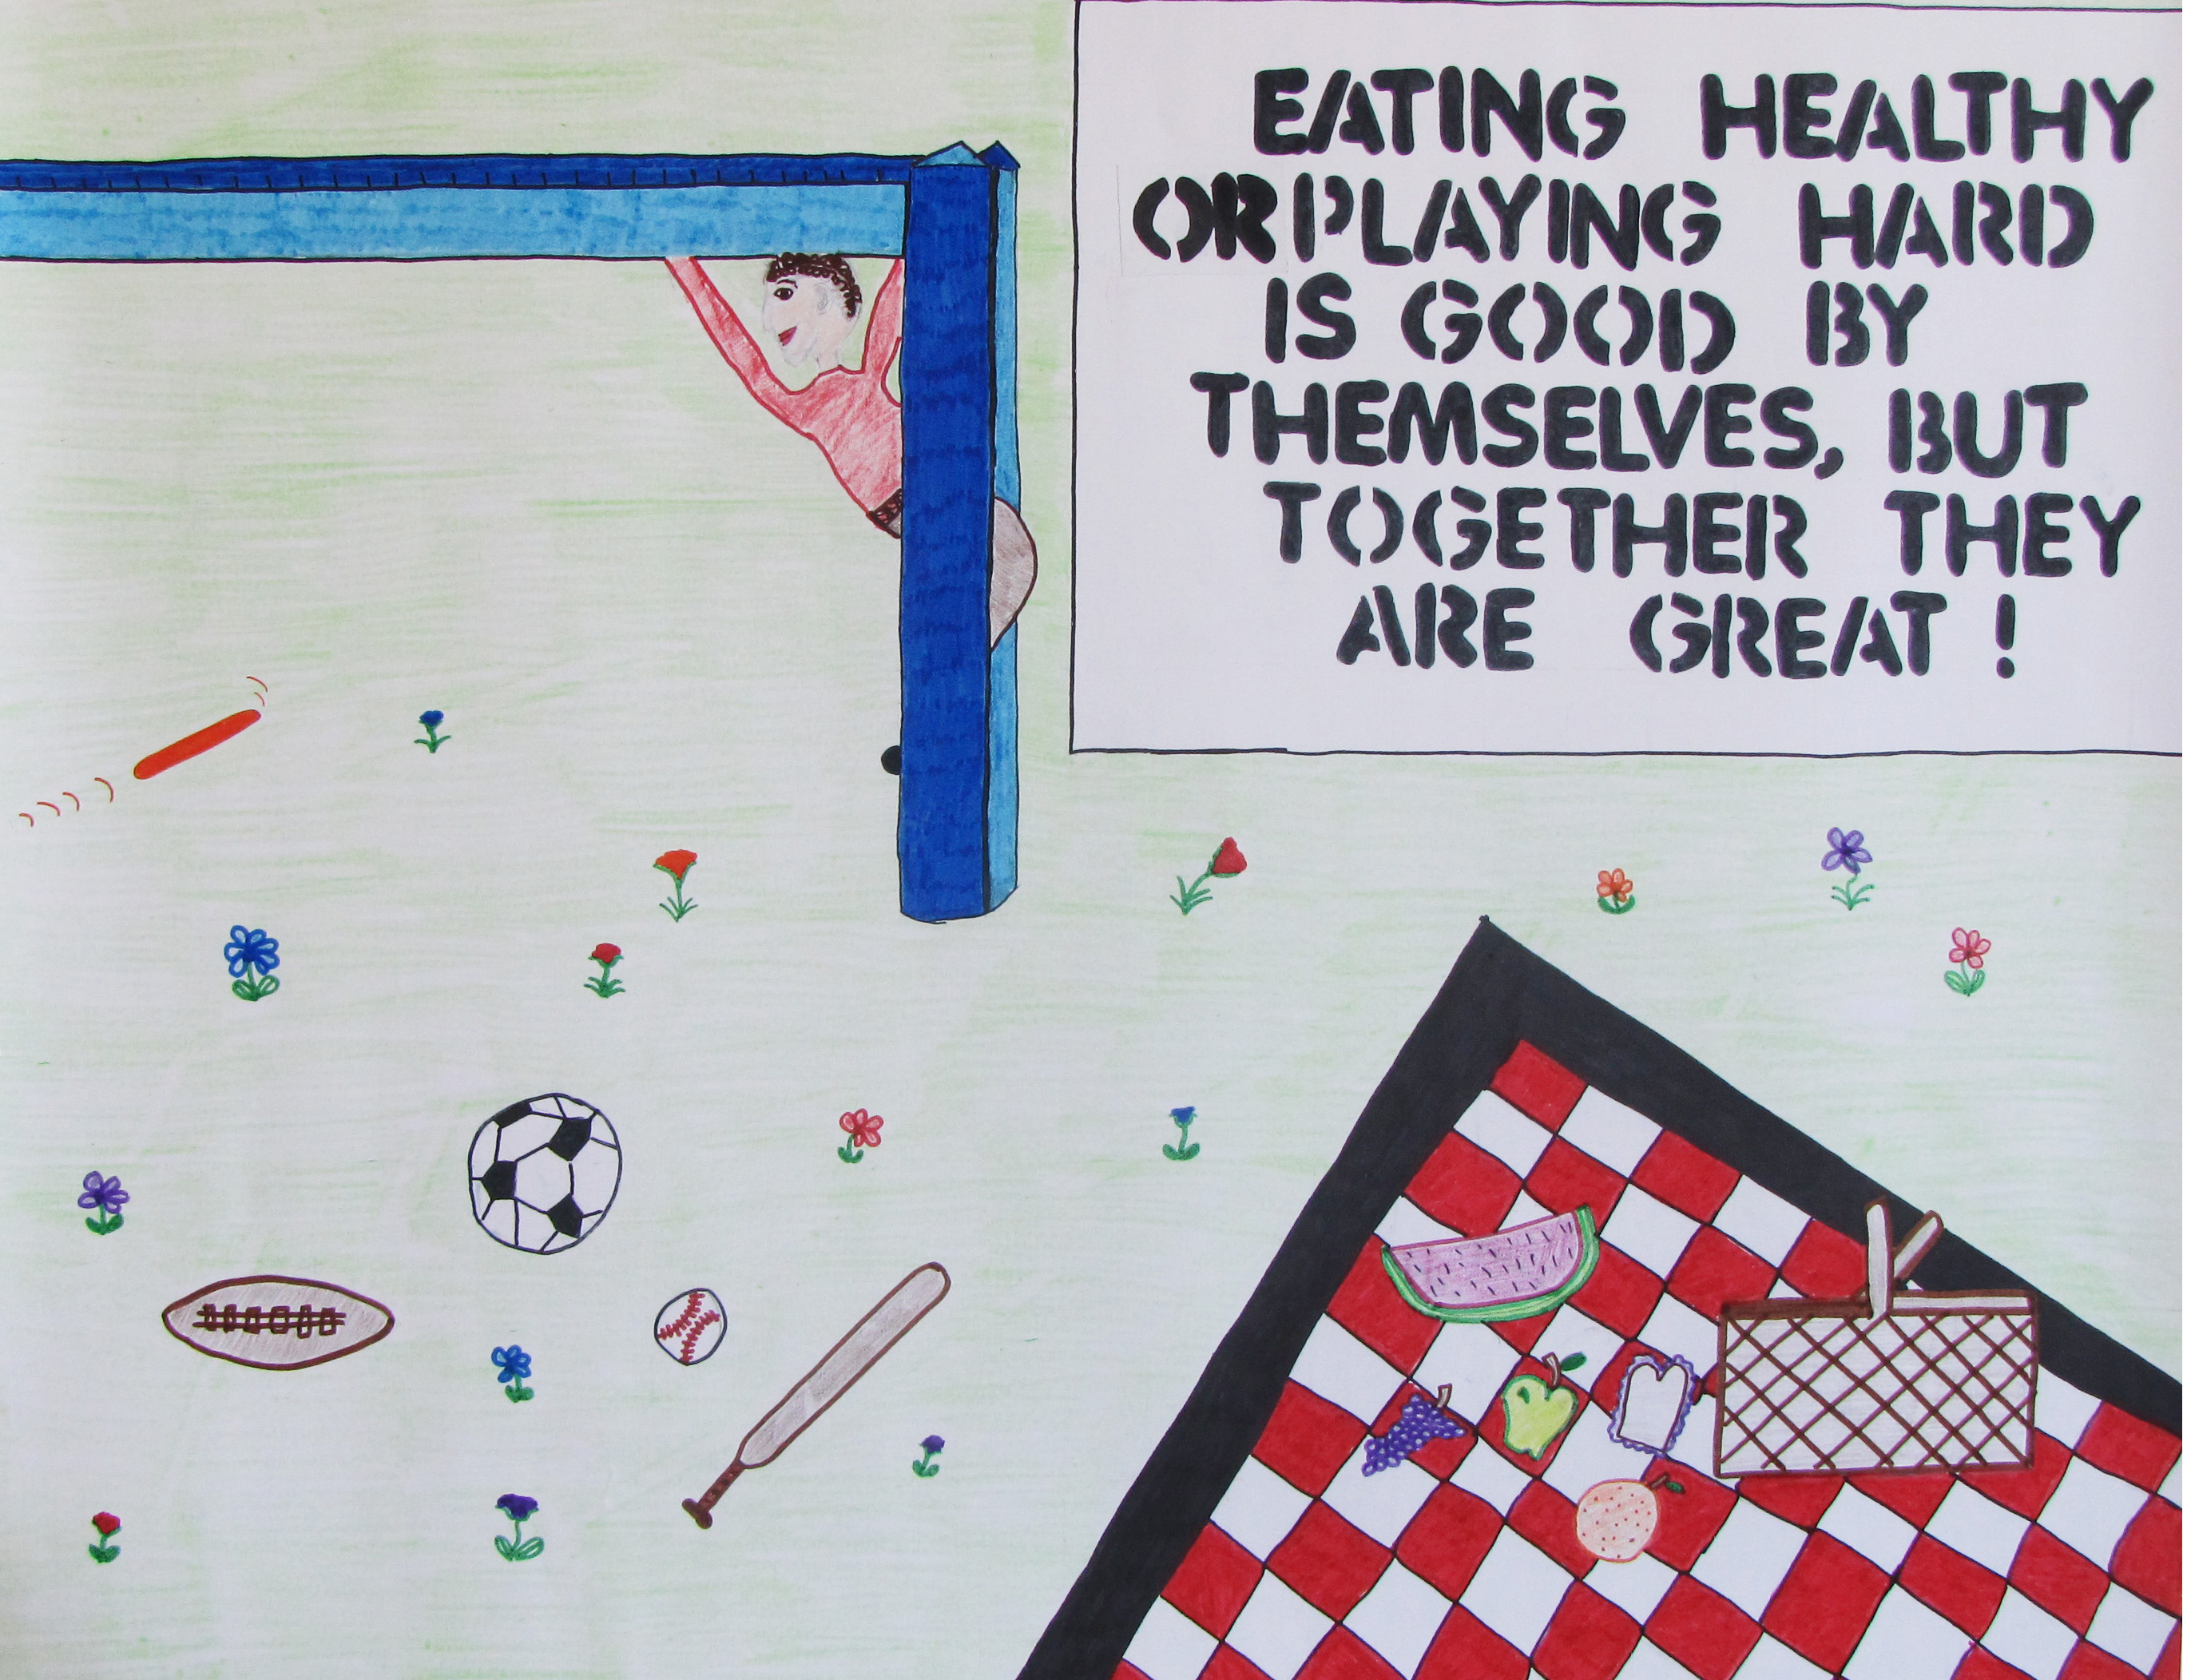 This poster wins Madison Harvey, Minot, second place in the teen division of the 2014 ""Eat Smart. Play Hard."" poster contest.